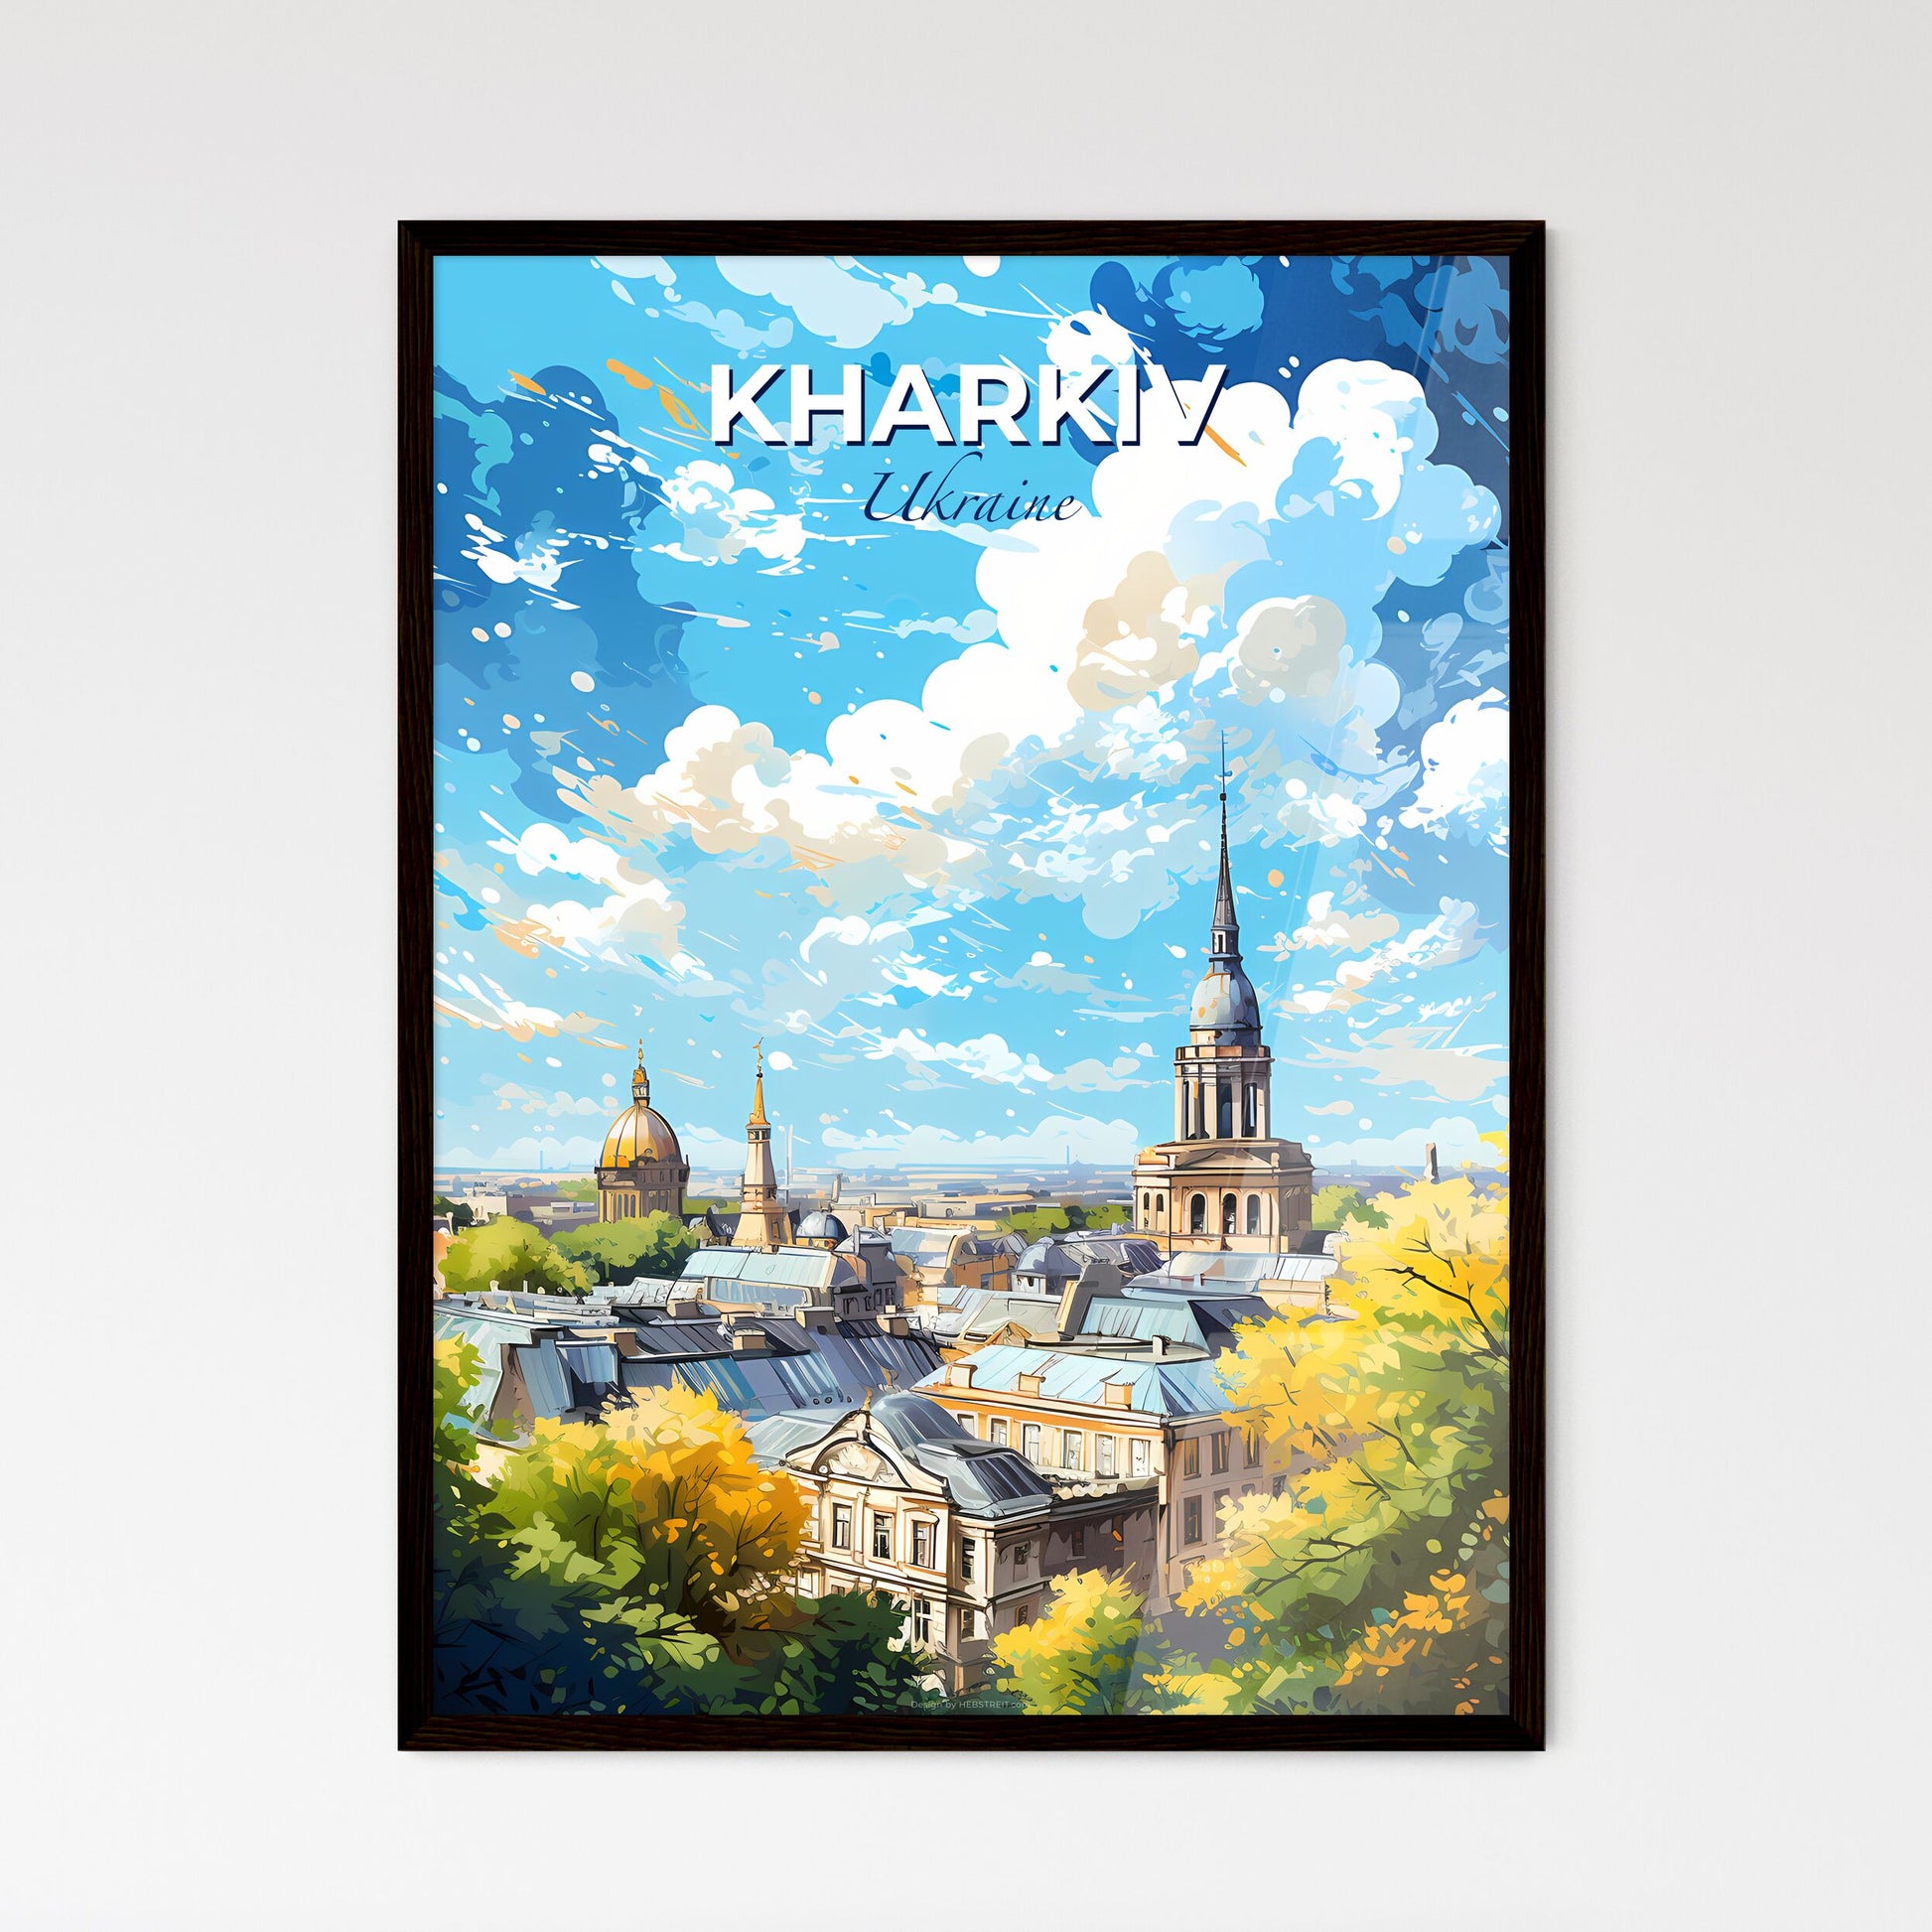 Kharkiv Ukraine Skyline - A City With A Steeple And Trees - Customizable Travel Gift Default Title